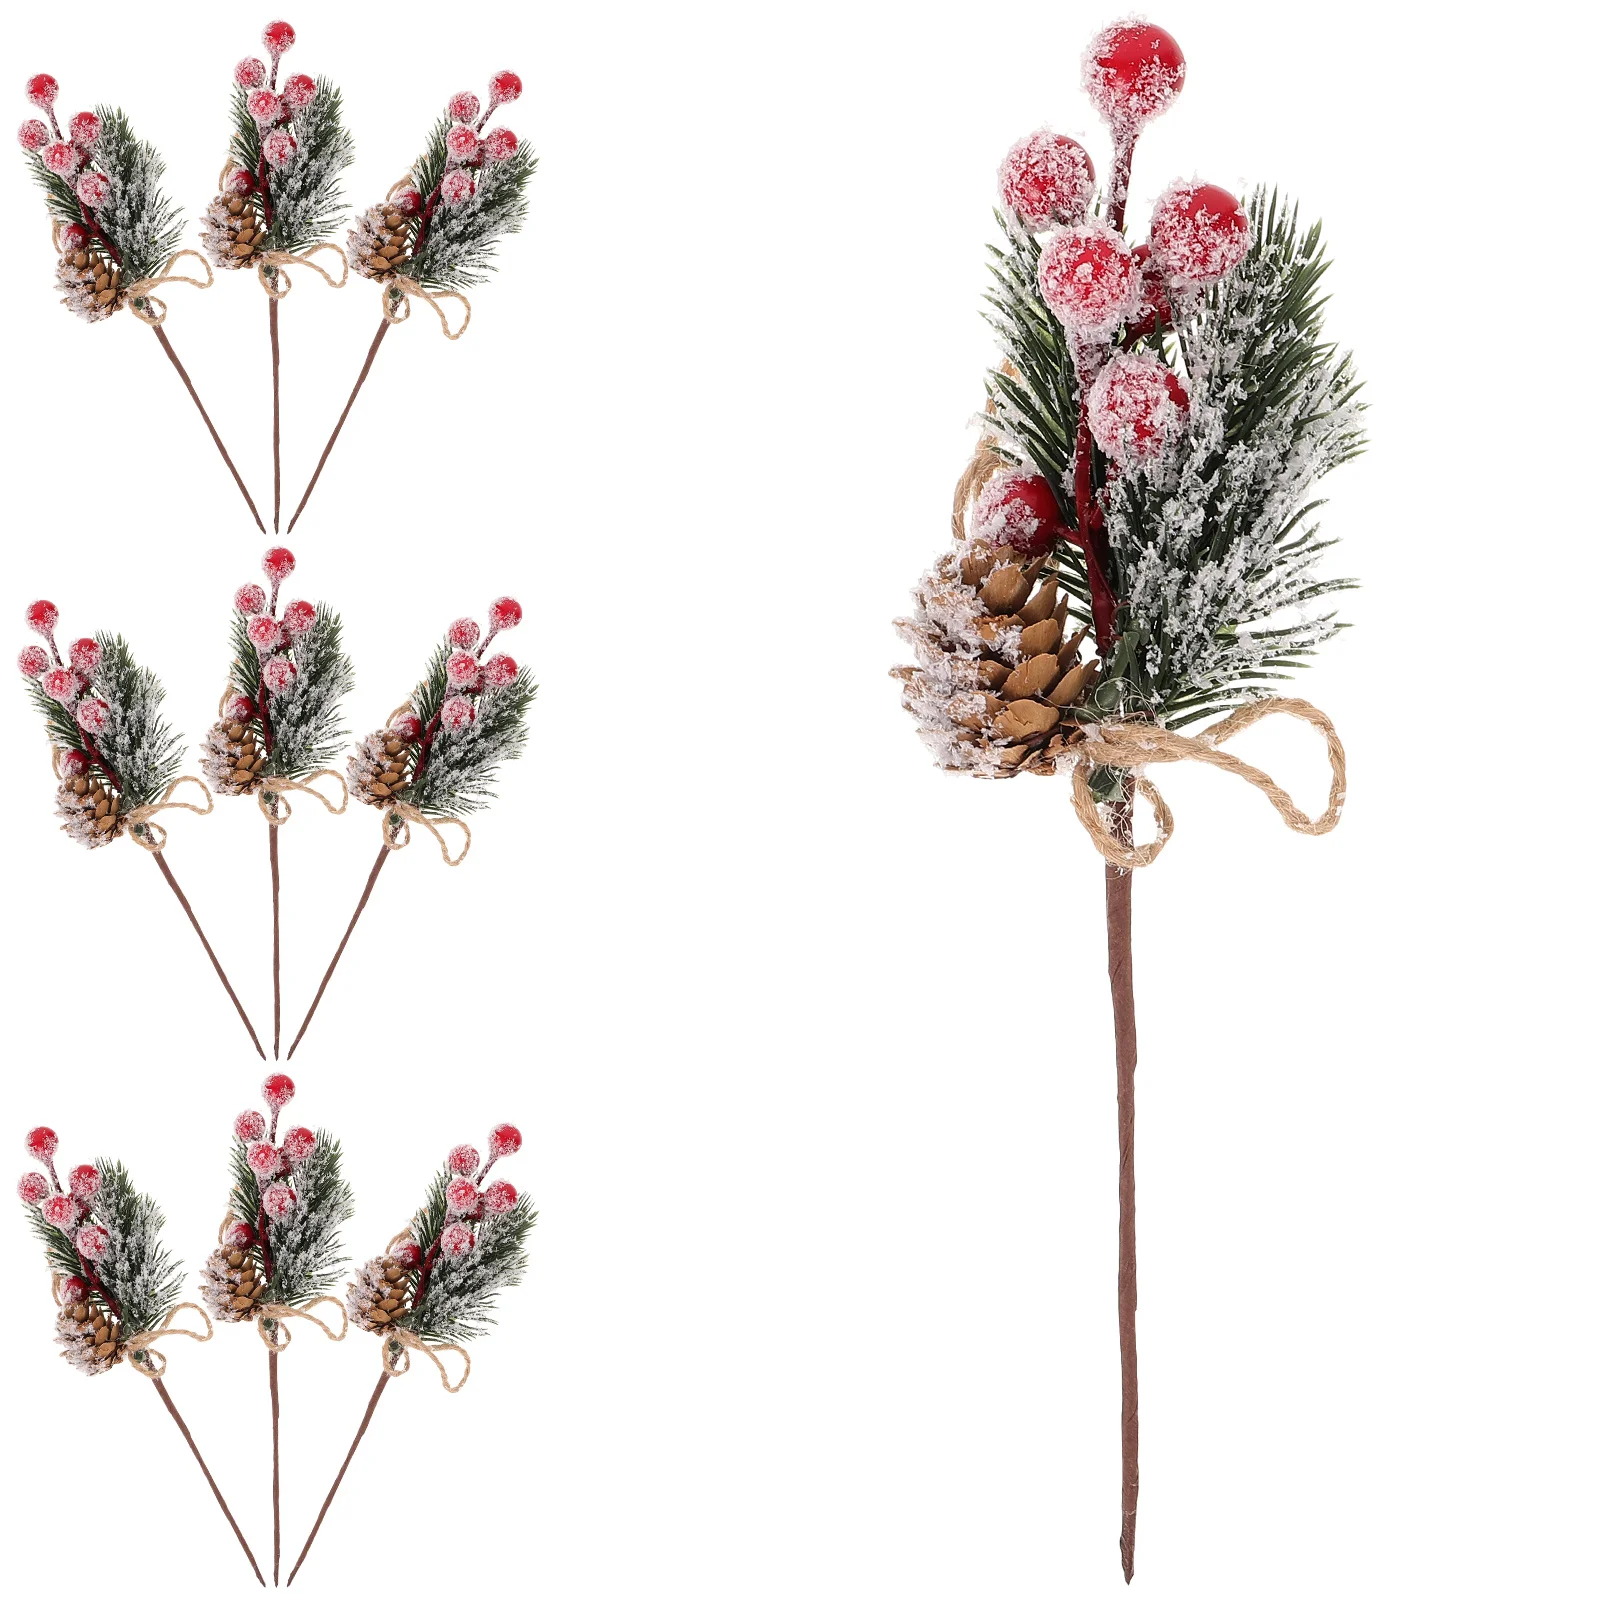 

Artificial Pine Needles Garland Red Berry Pine Pick Branches For Christmas Flower Arrangement Wreaths Decorations